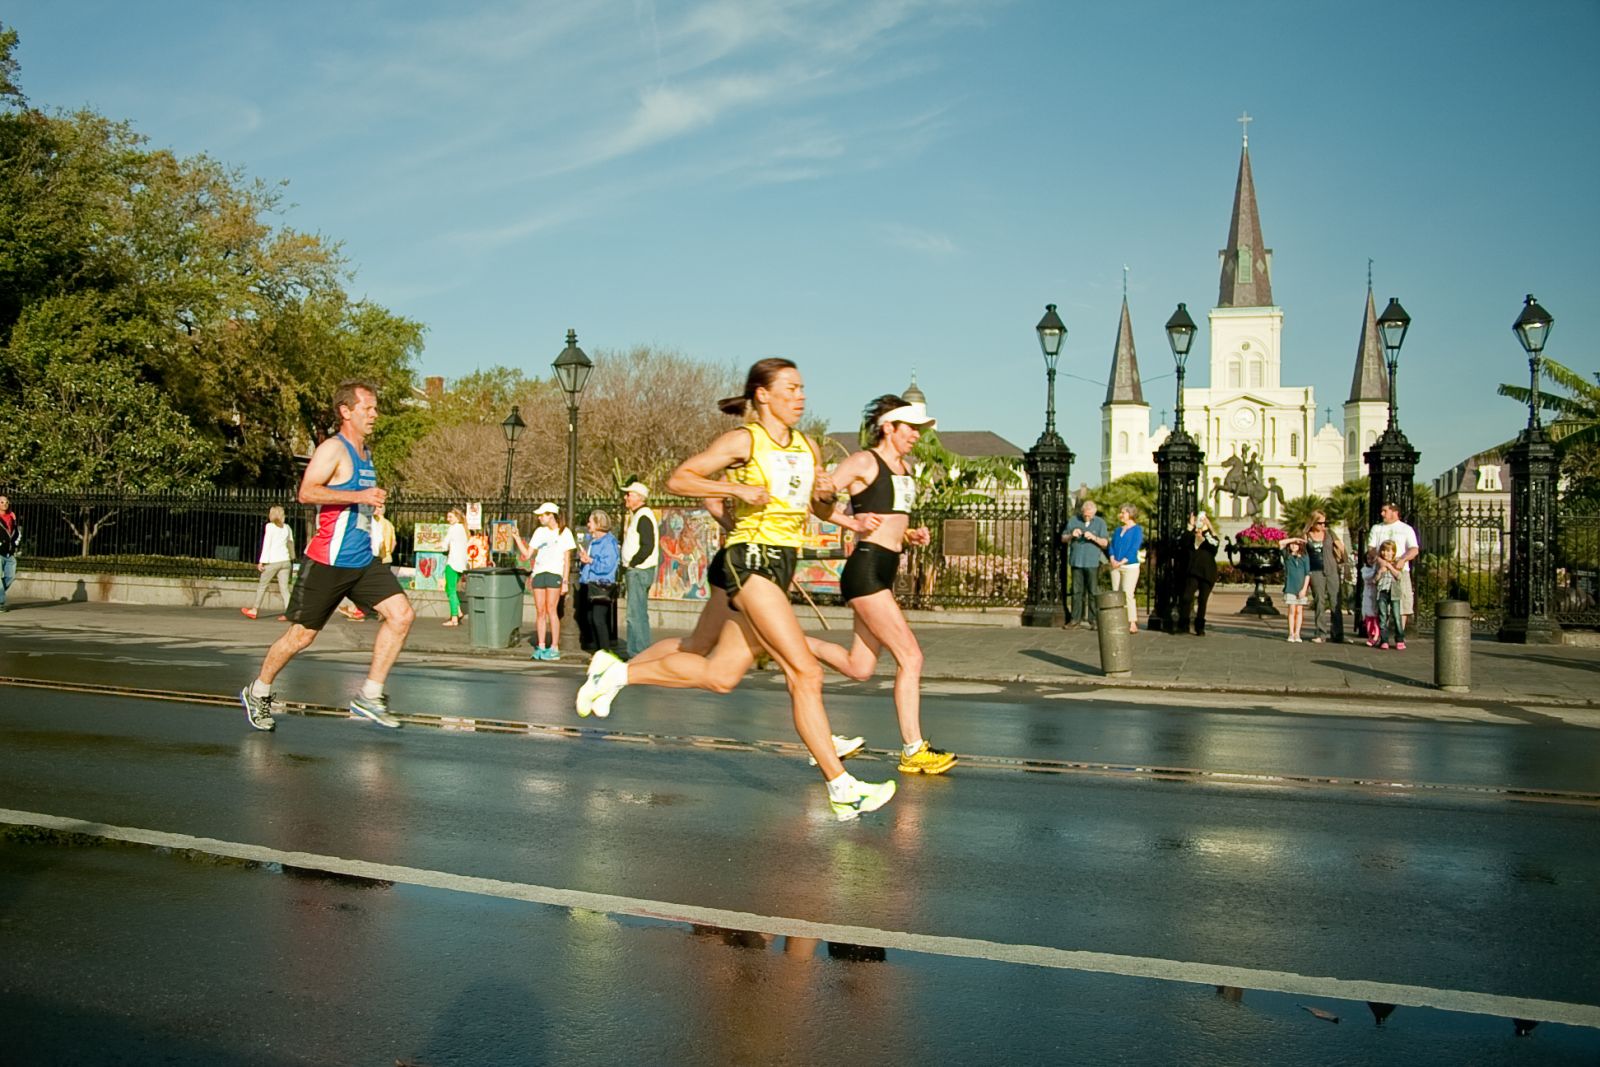 Expect changes at the Crescent City Classic Experience New Orleans!